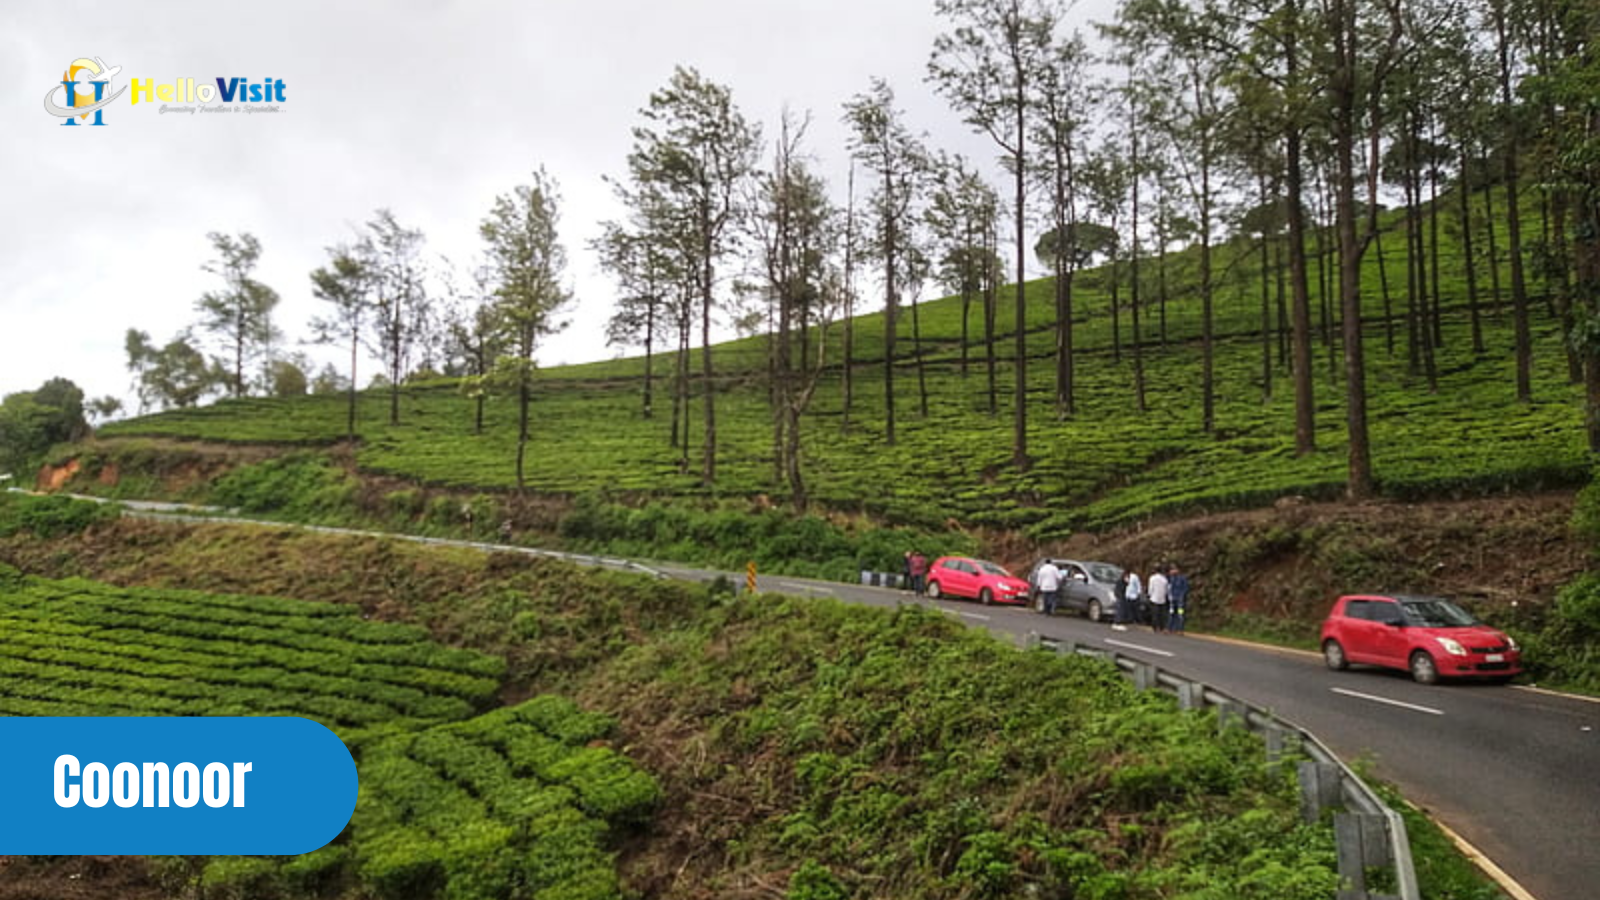 Coonoor, Top Hill stations of South India to visit in January